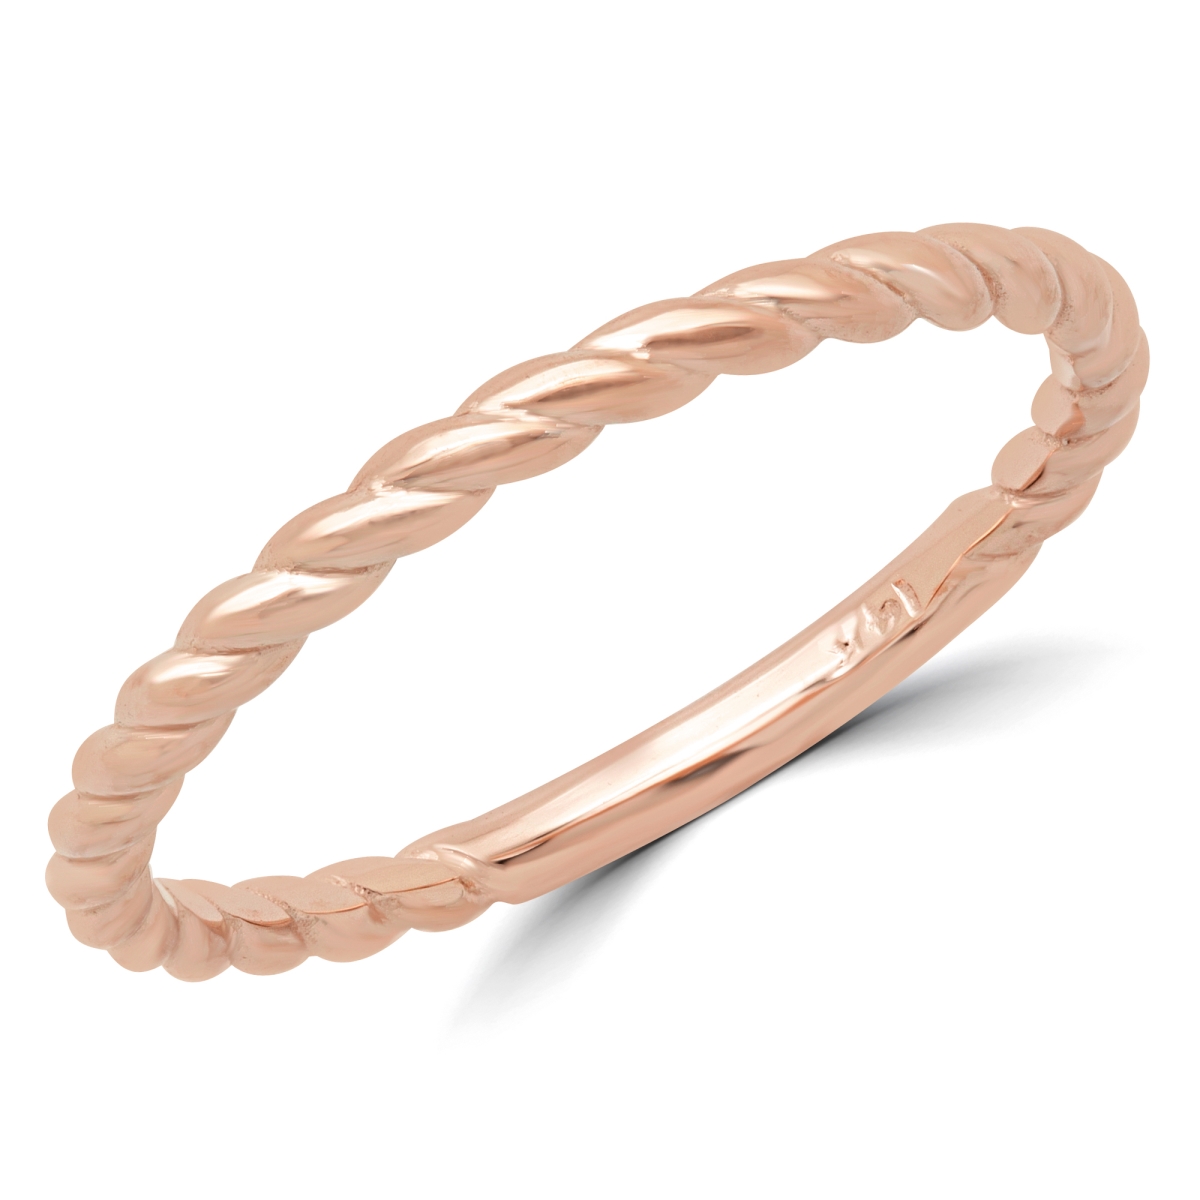 Picture of Majesty Diamonds MD180603-5.75 Braided Rope Classic Wedding Band Ring in 14K Rose Gold - Size 5.75